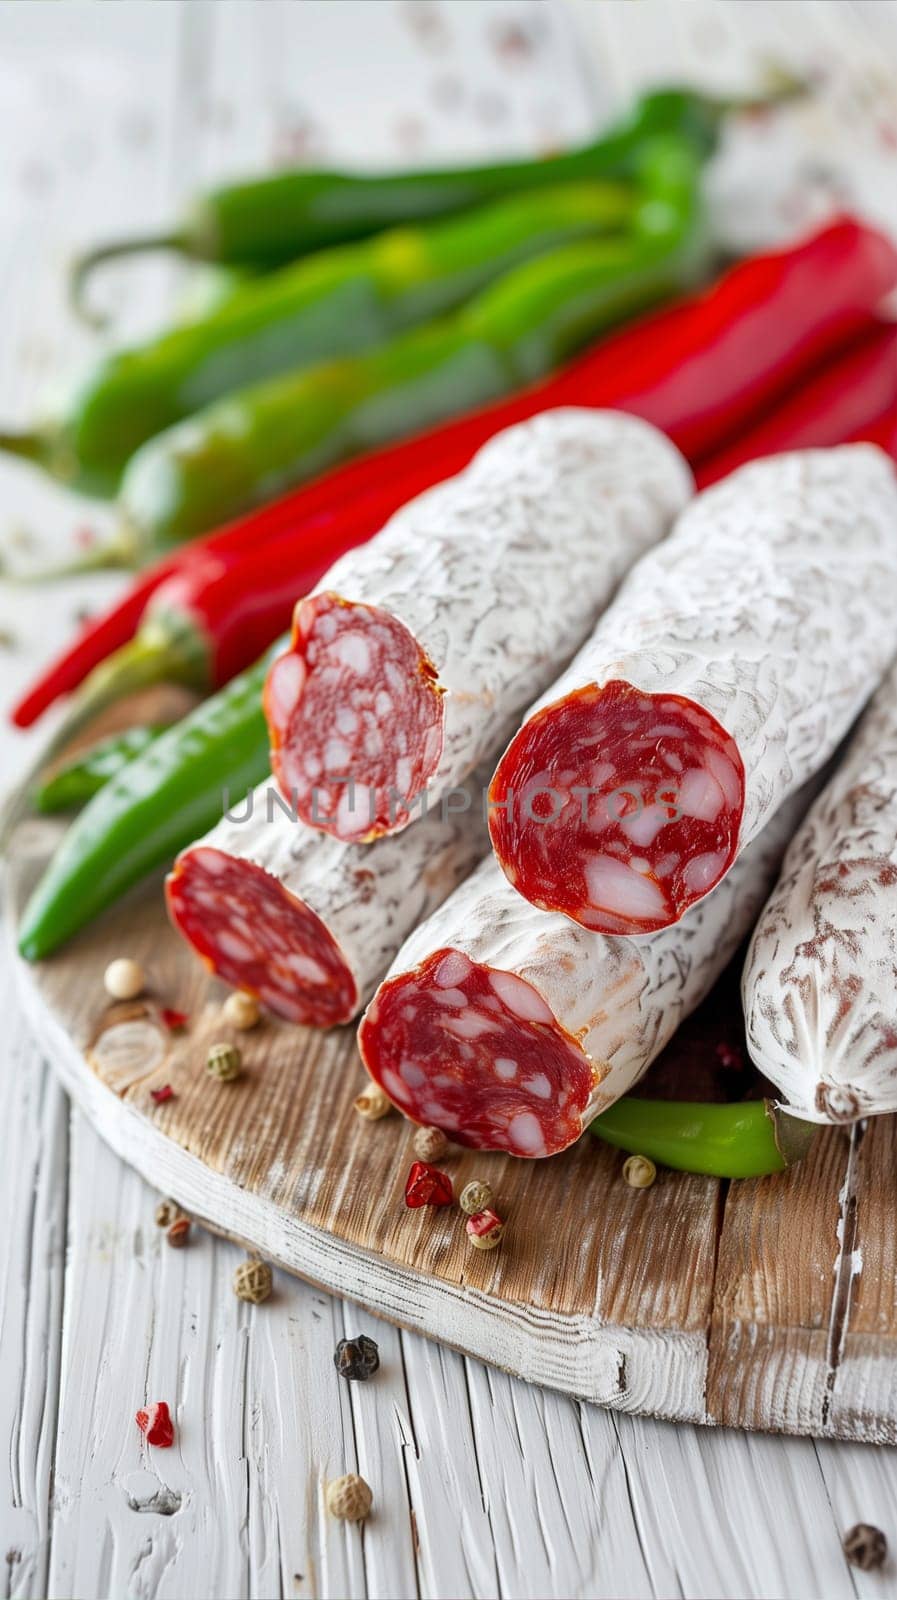 Artisanal Salami With Fresh Chili Peppers on Rustic Wooden Board by Sd28DimoN_1976